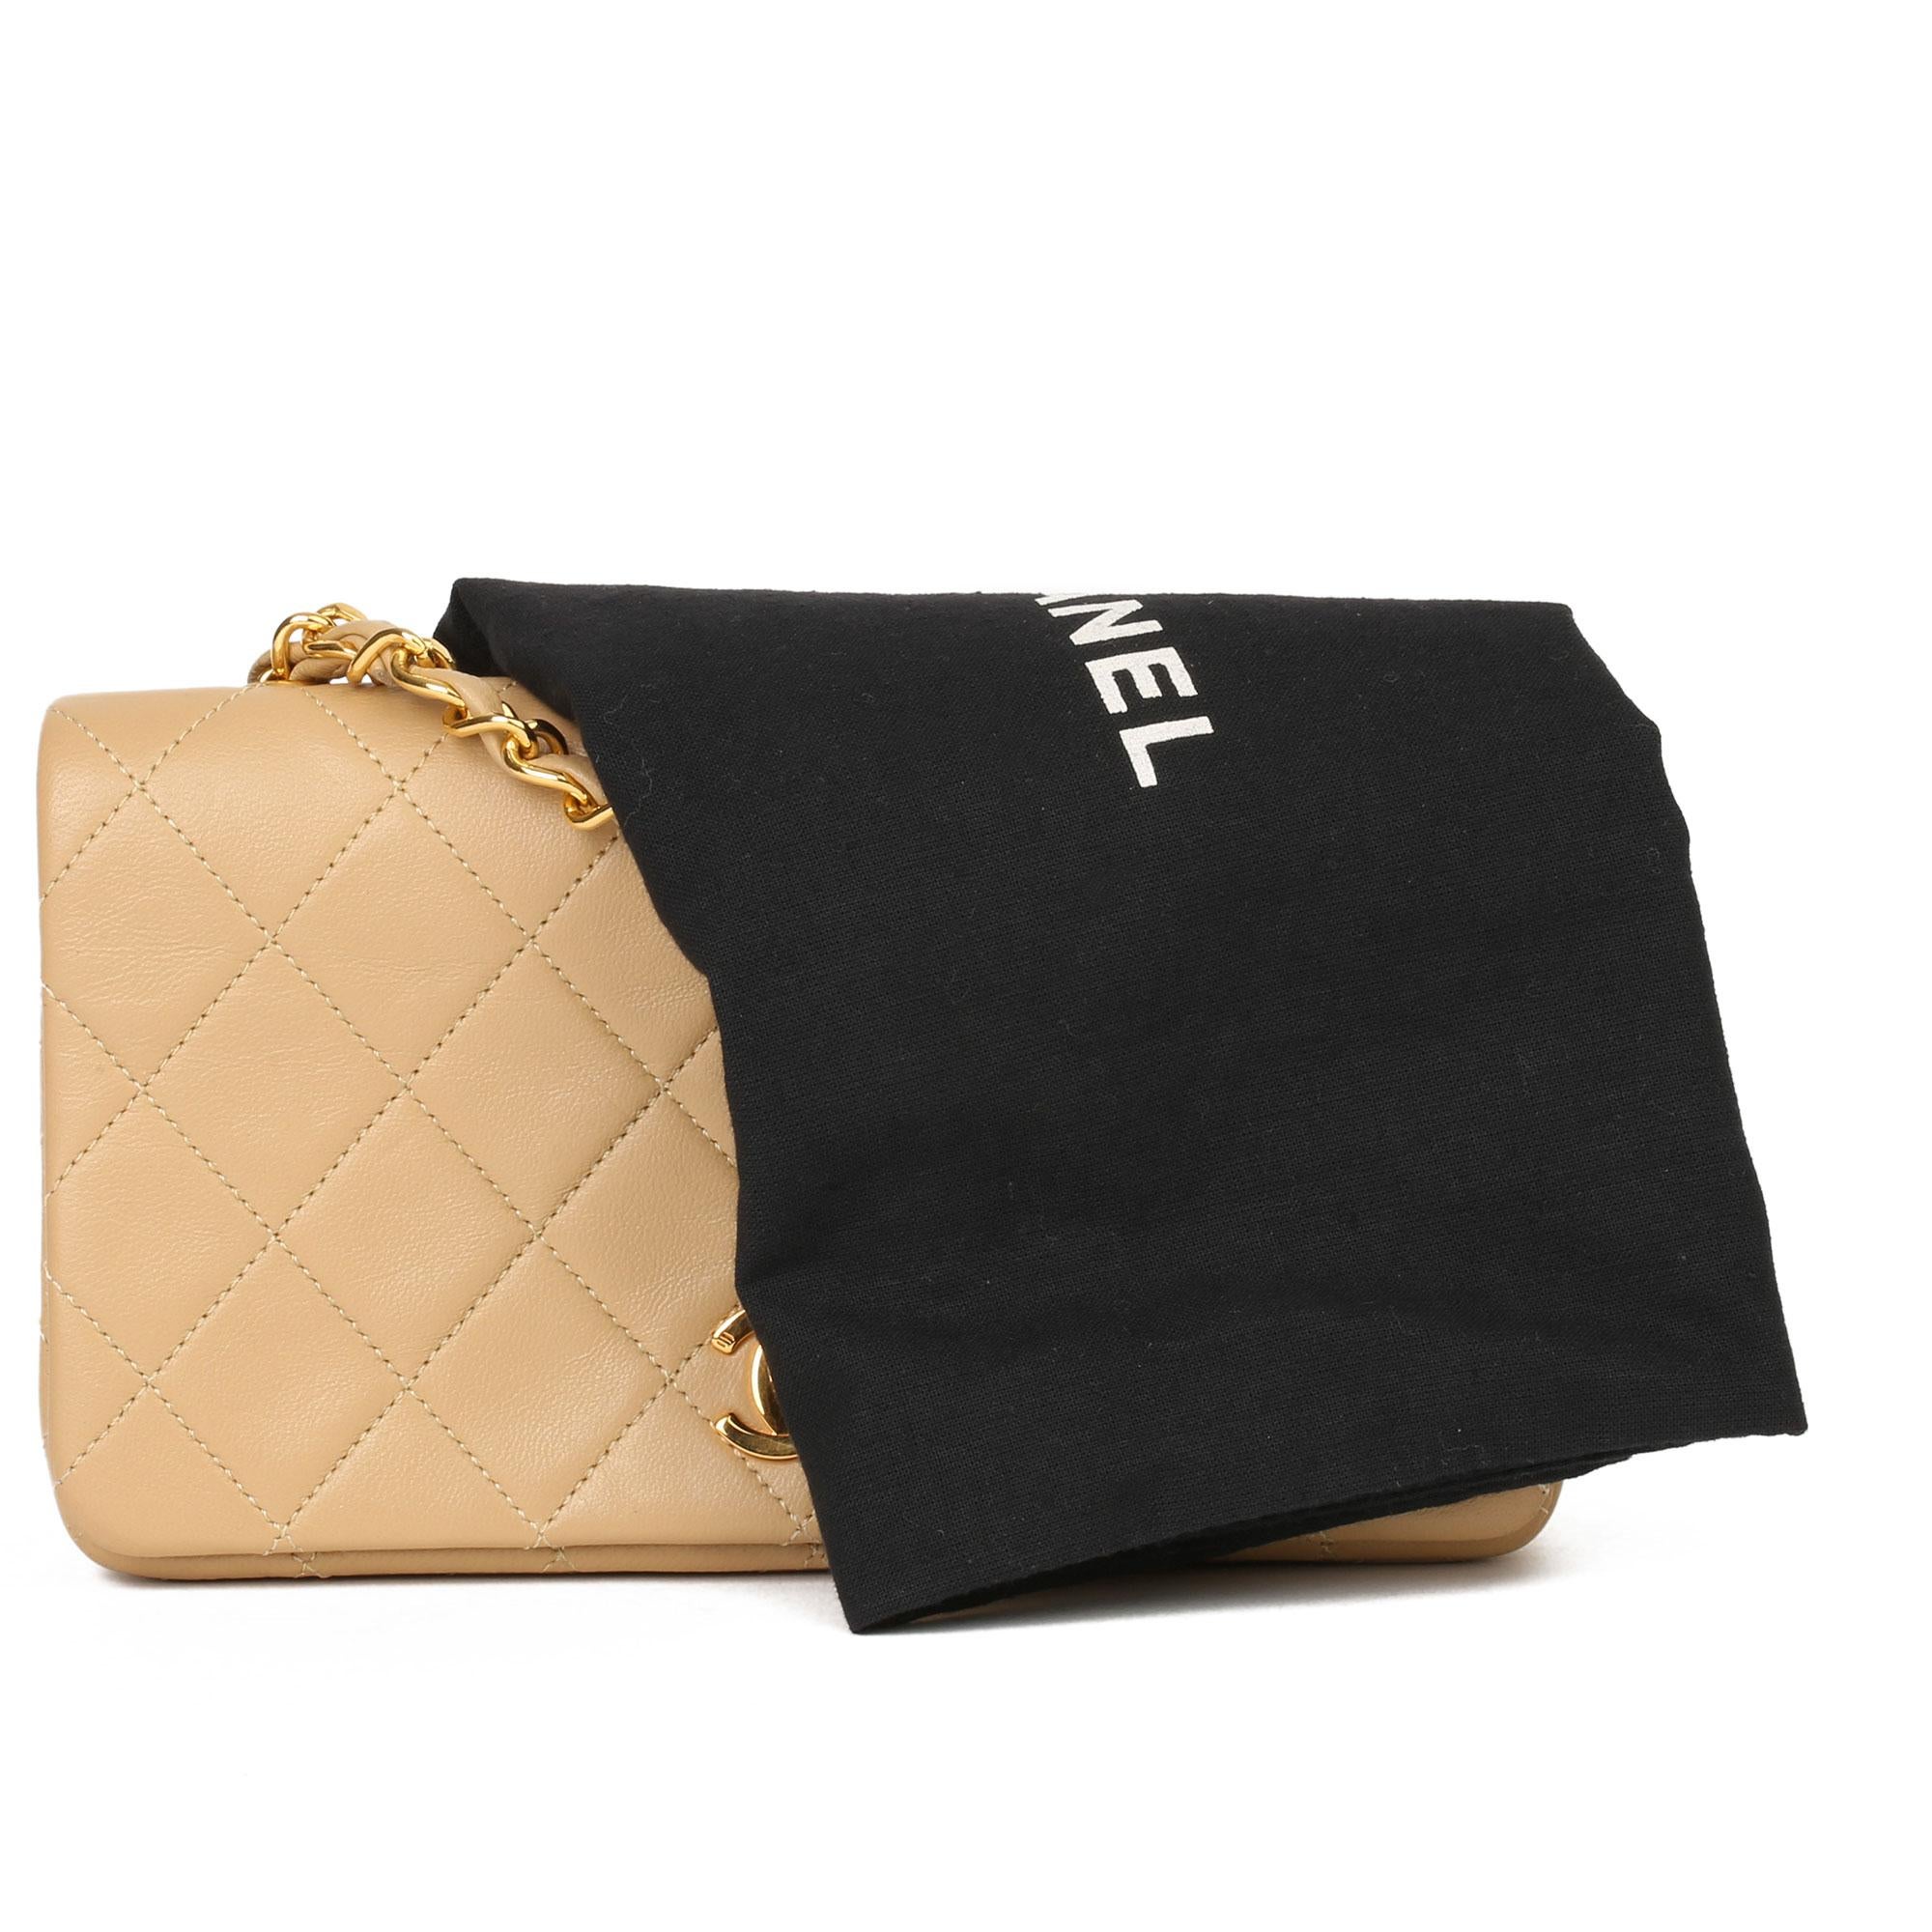 Chanel Beige Quilted Lambskin Vintage Mini Flap Bag 6